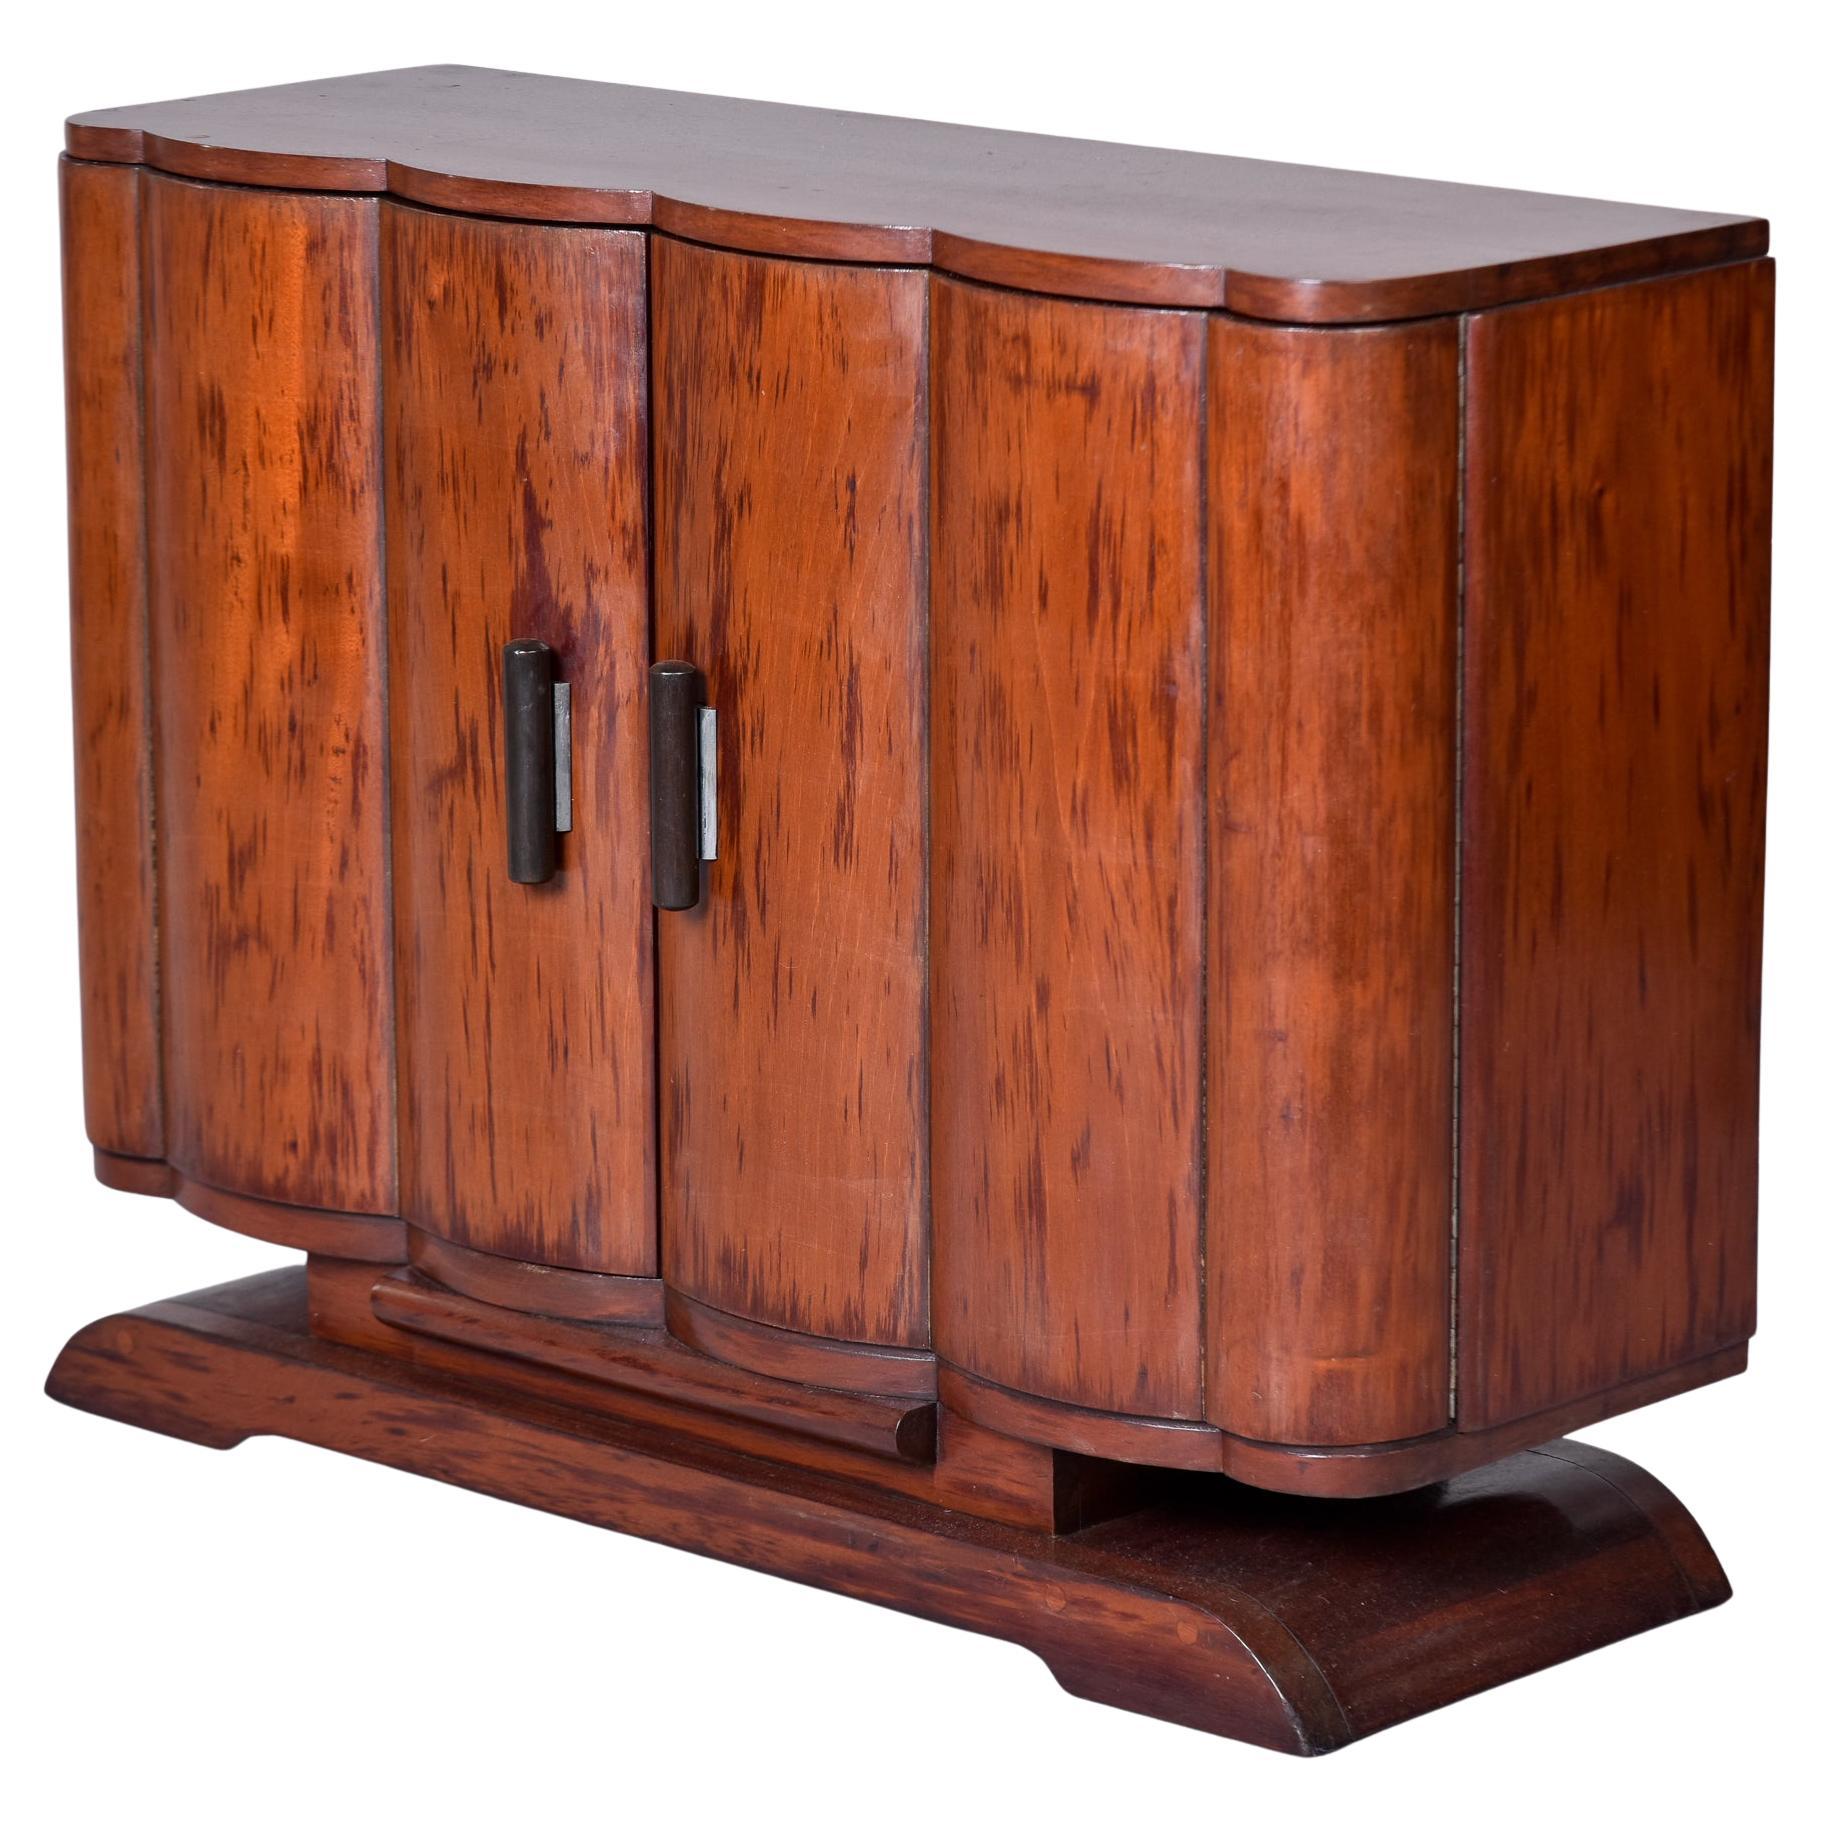 French Art Deco Mahogany Bar Cabinet with Curved Doors and Pedestal Base